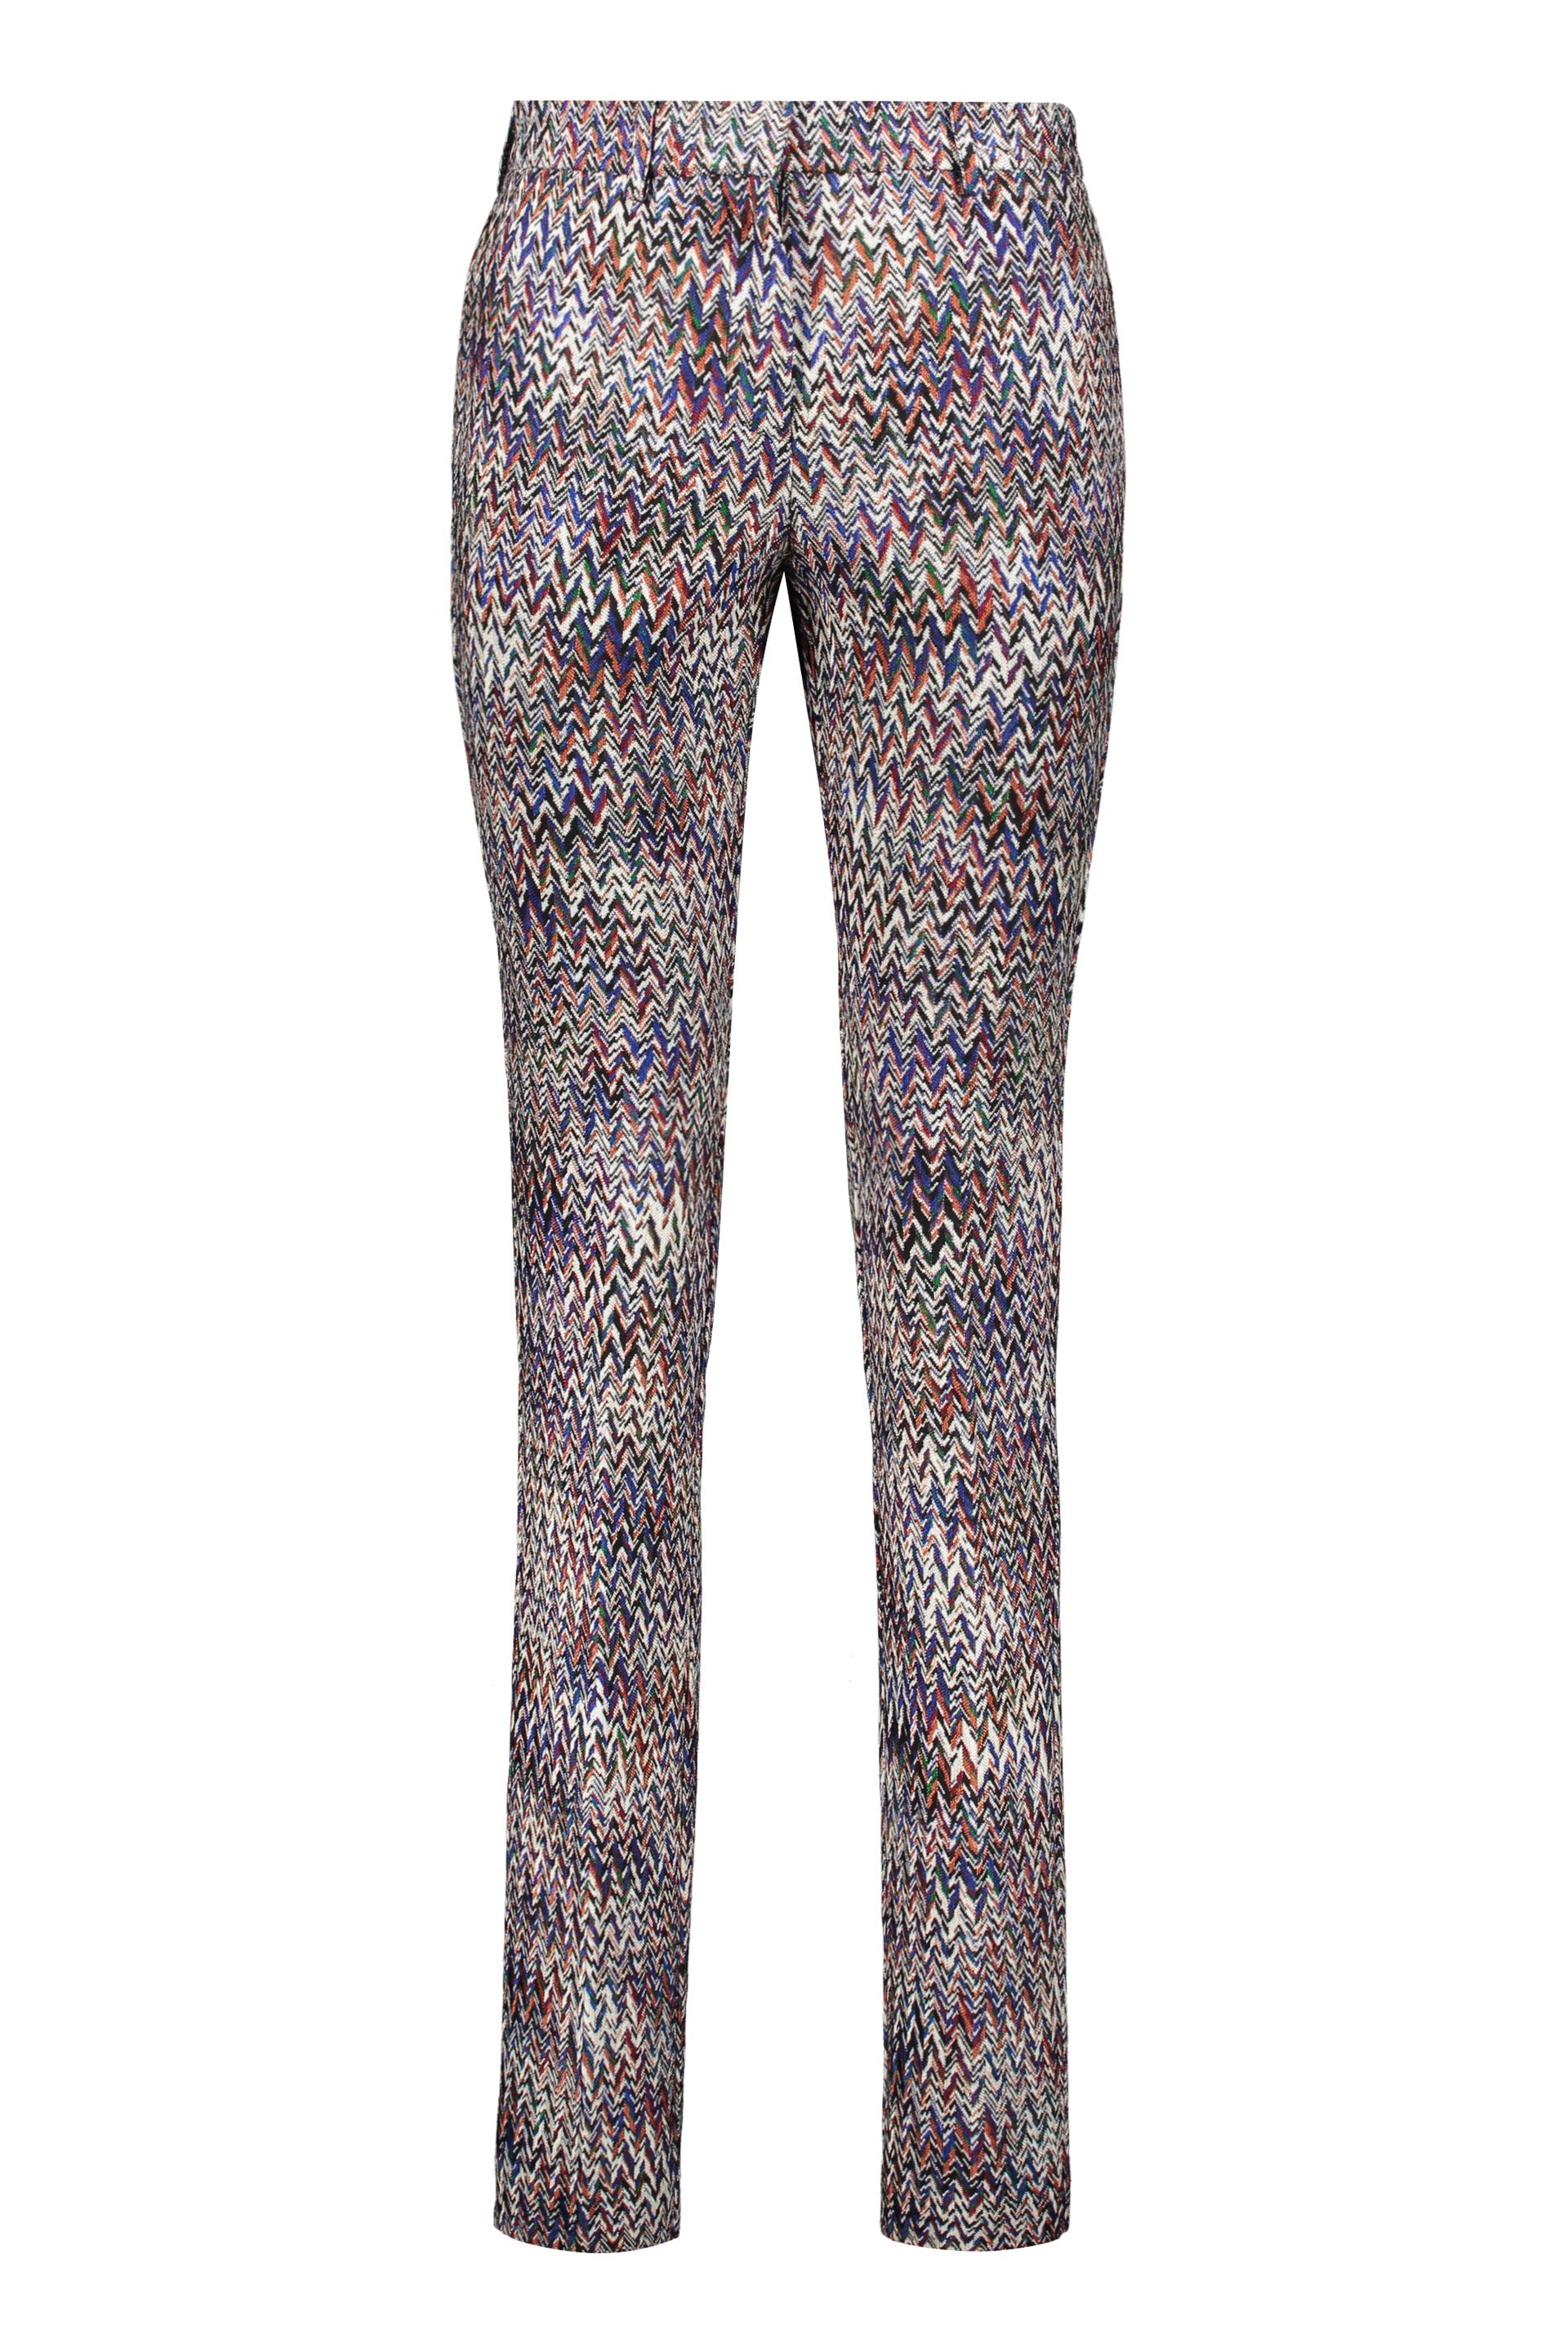 Missoni-OUTLET-SALE-Chevron-knitted-palazzo-trousers-Hosen-40-ARCHIVE-COLLECTION_218bdd09-767a-4b6e-9a37-d000d0b4c16f.jpg